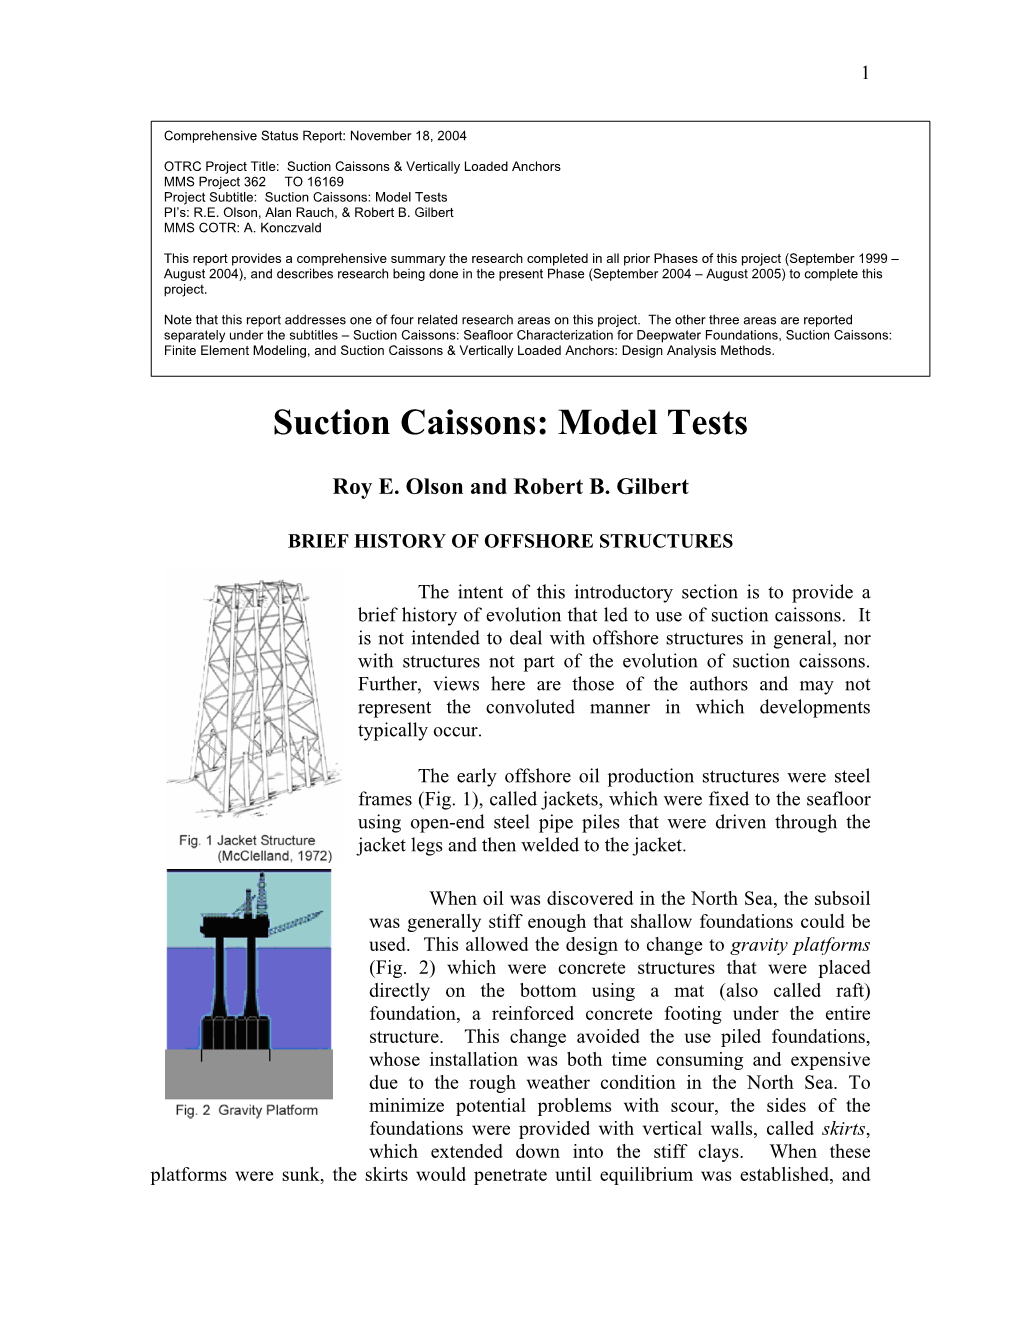 Suction Caissons & Vertically Loaded Anchors MMS Project 362 to 16169 Project Subtitle: Suction Caissons: Model Tests PI’S: R.E